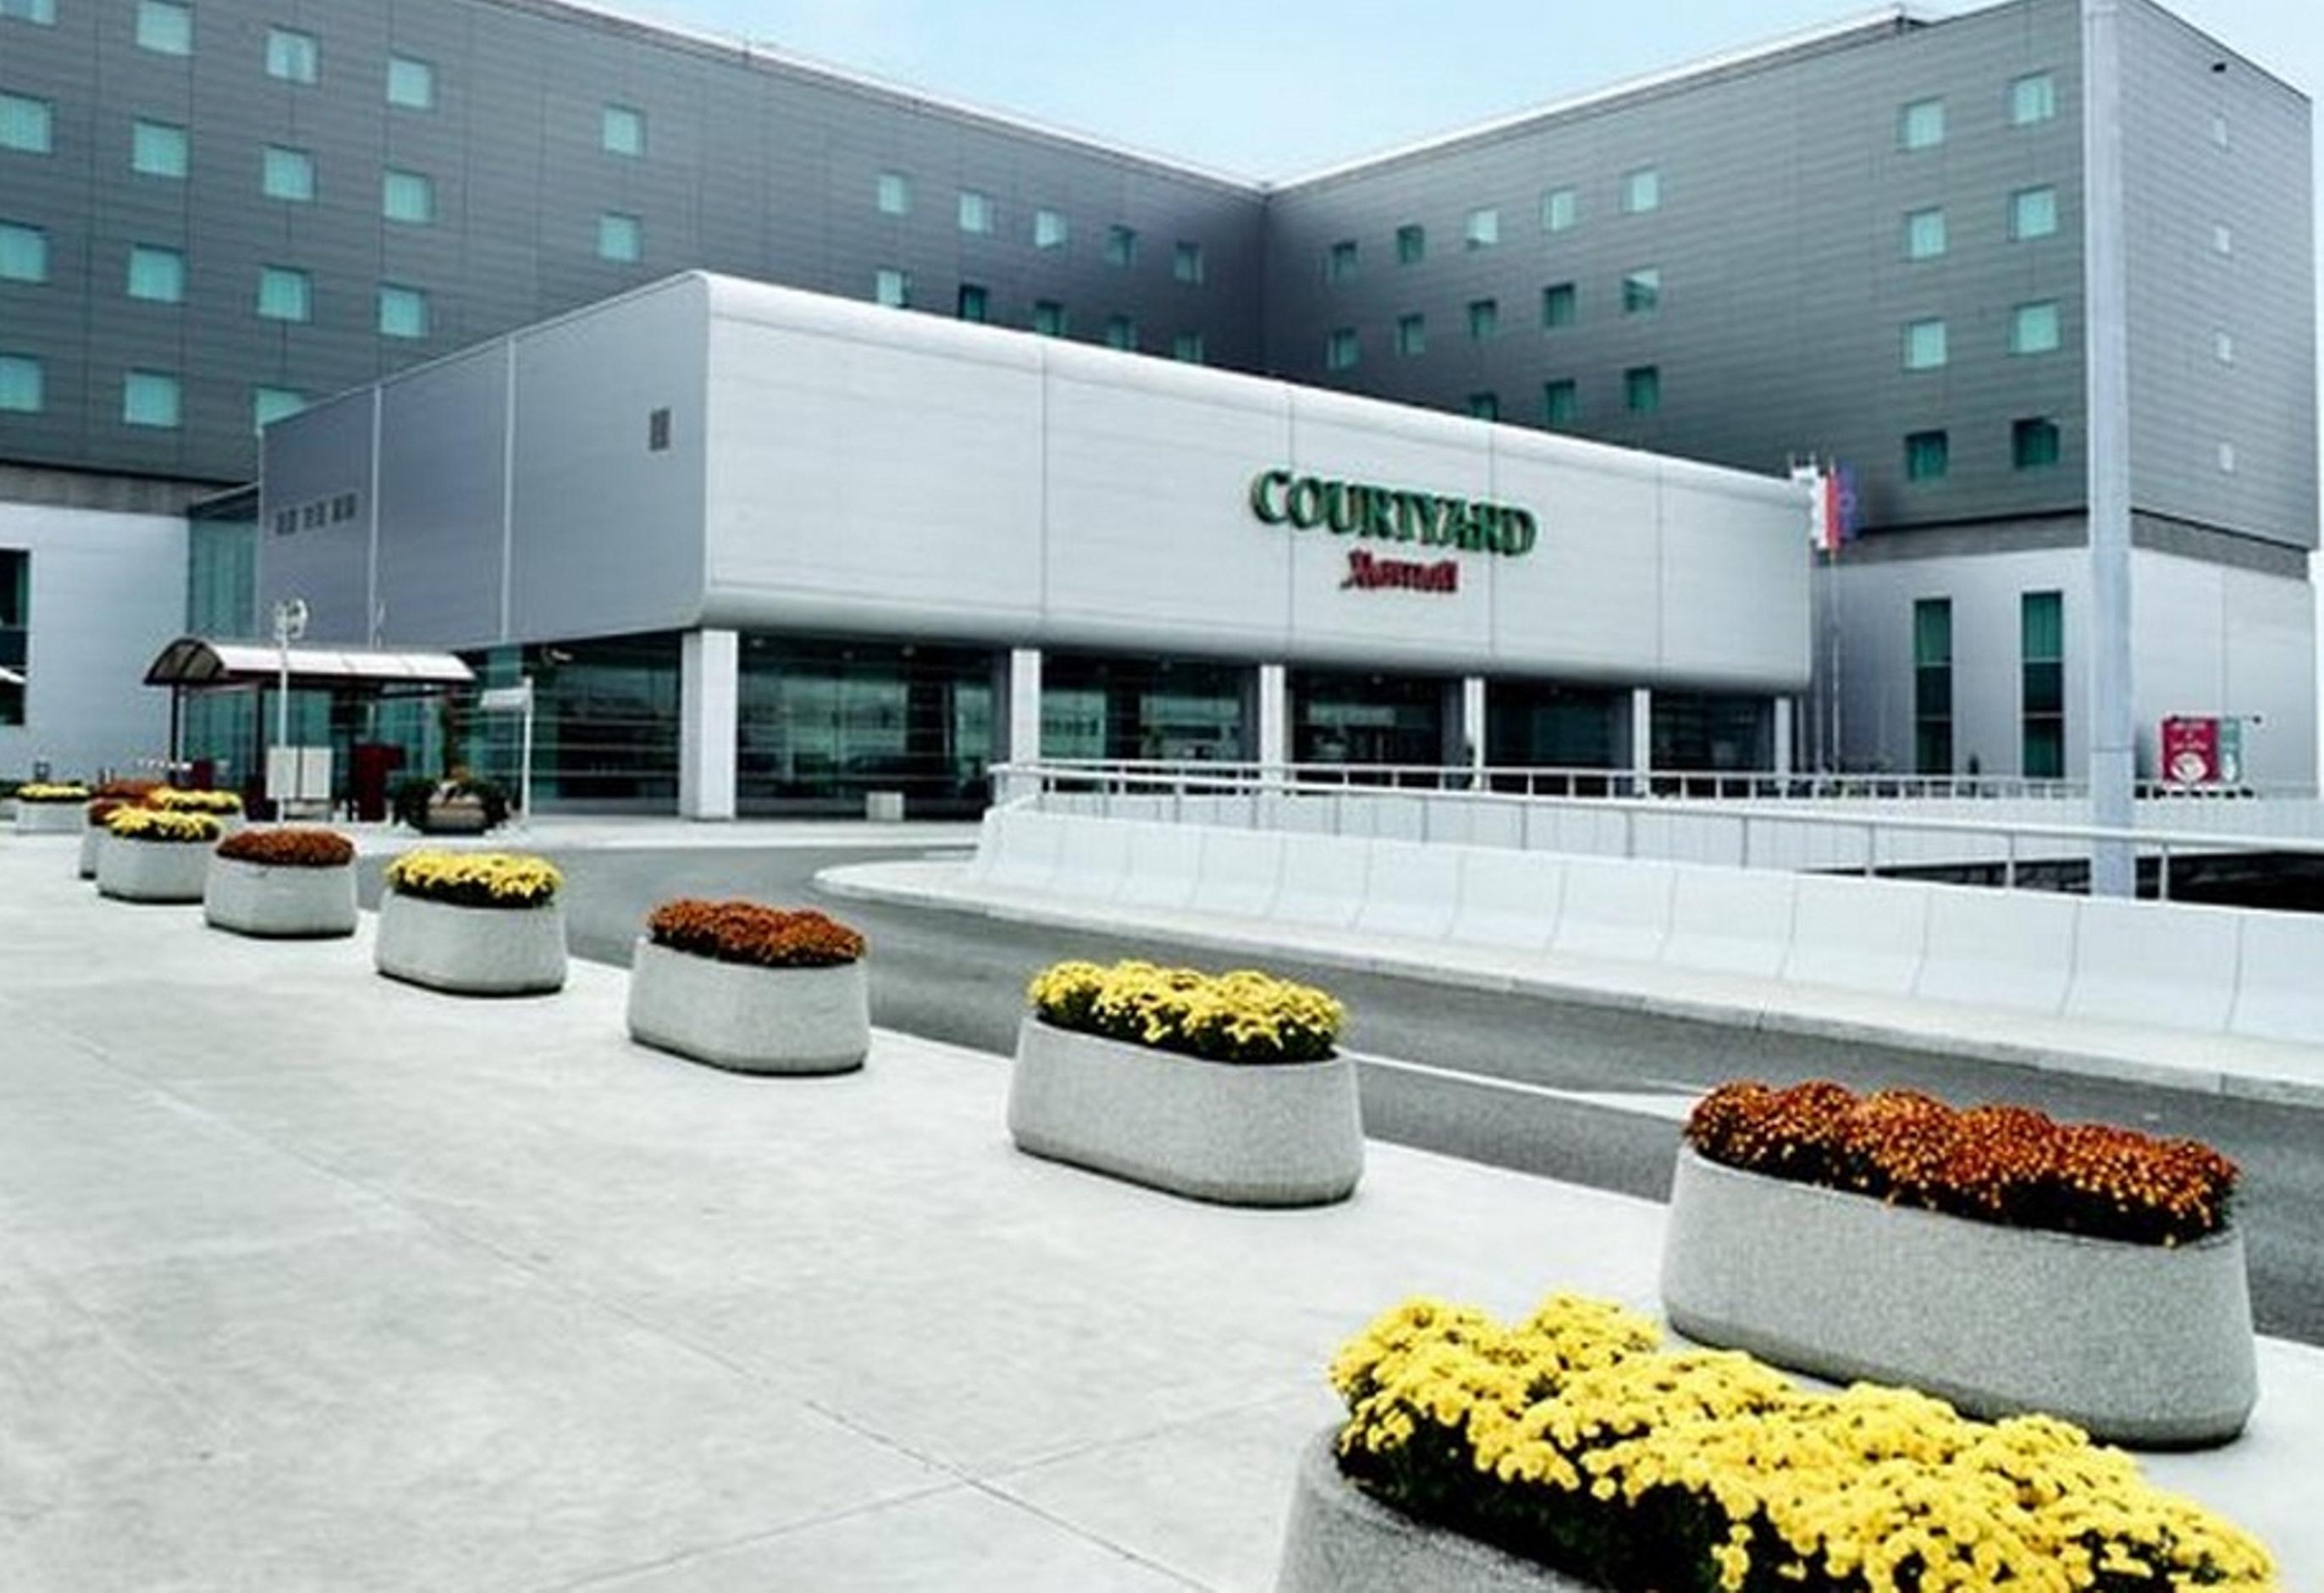 Courtyard by Marriott Warsaw Airport image